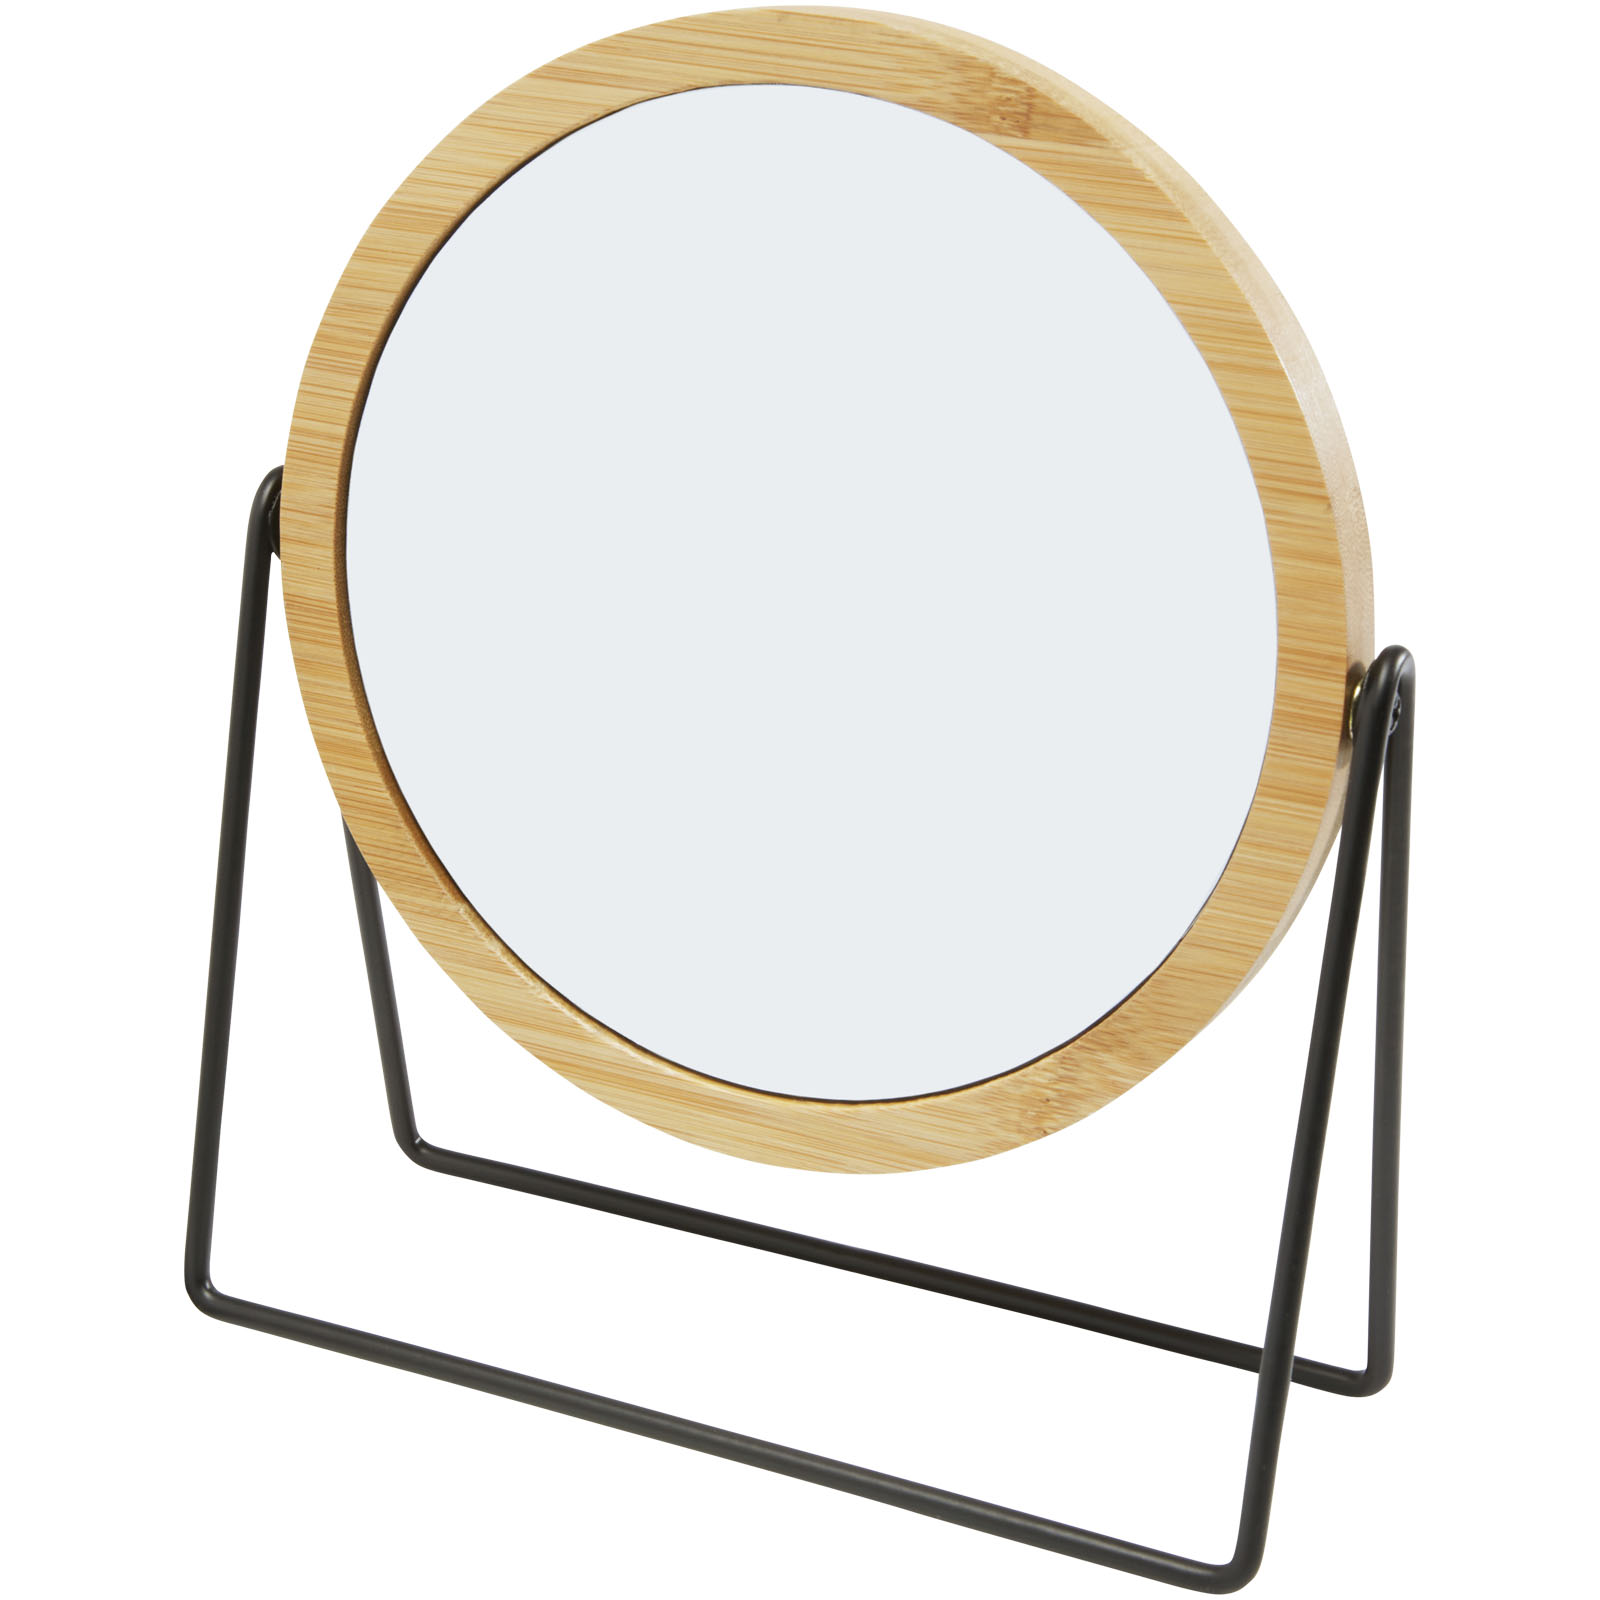 Bamboo table mirror ROPM - natural